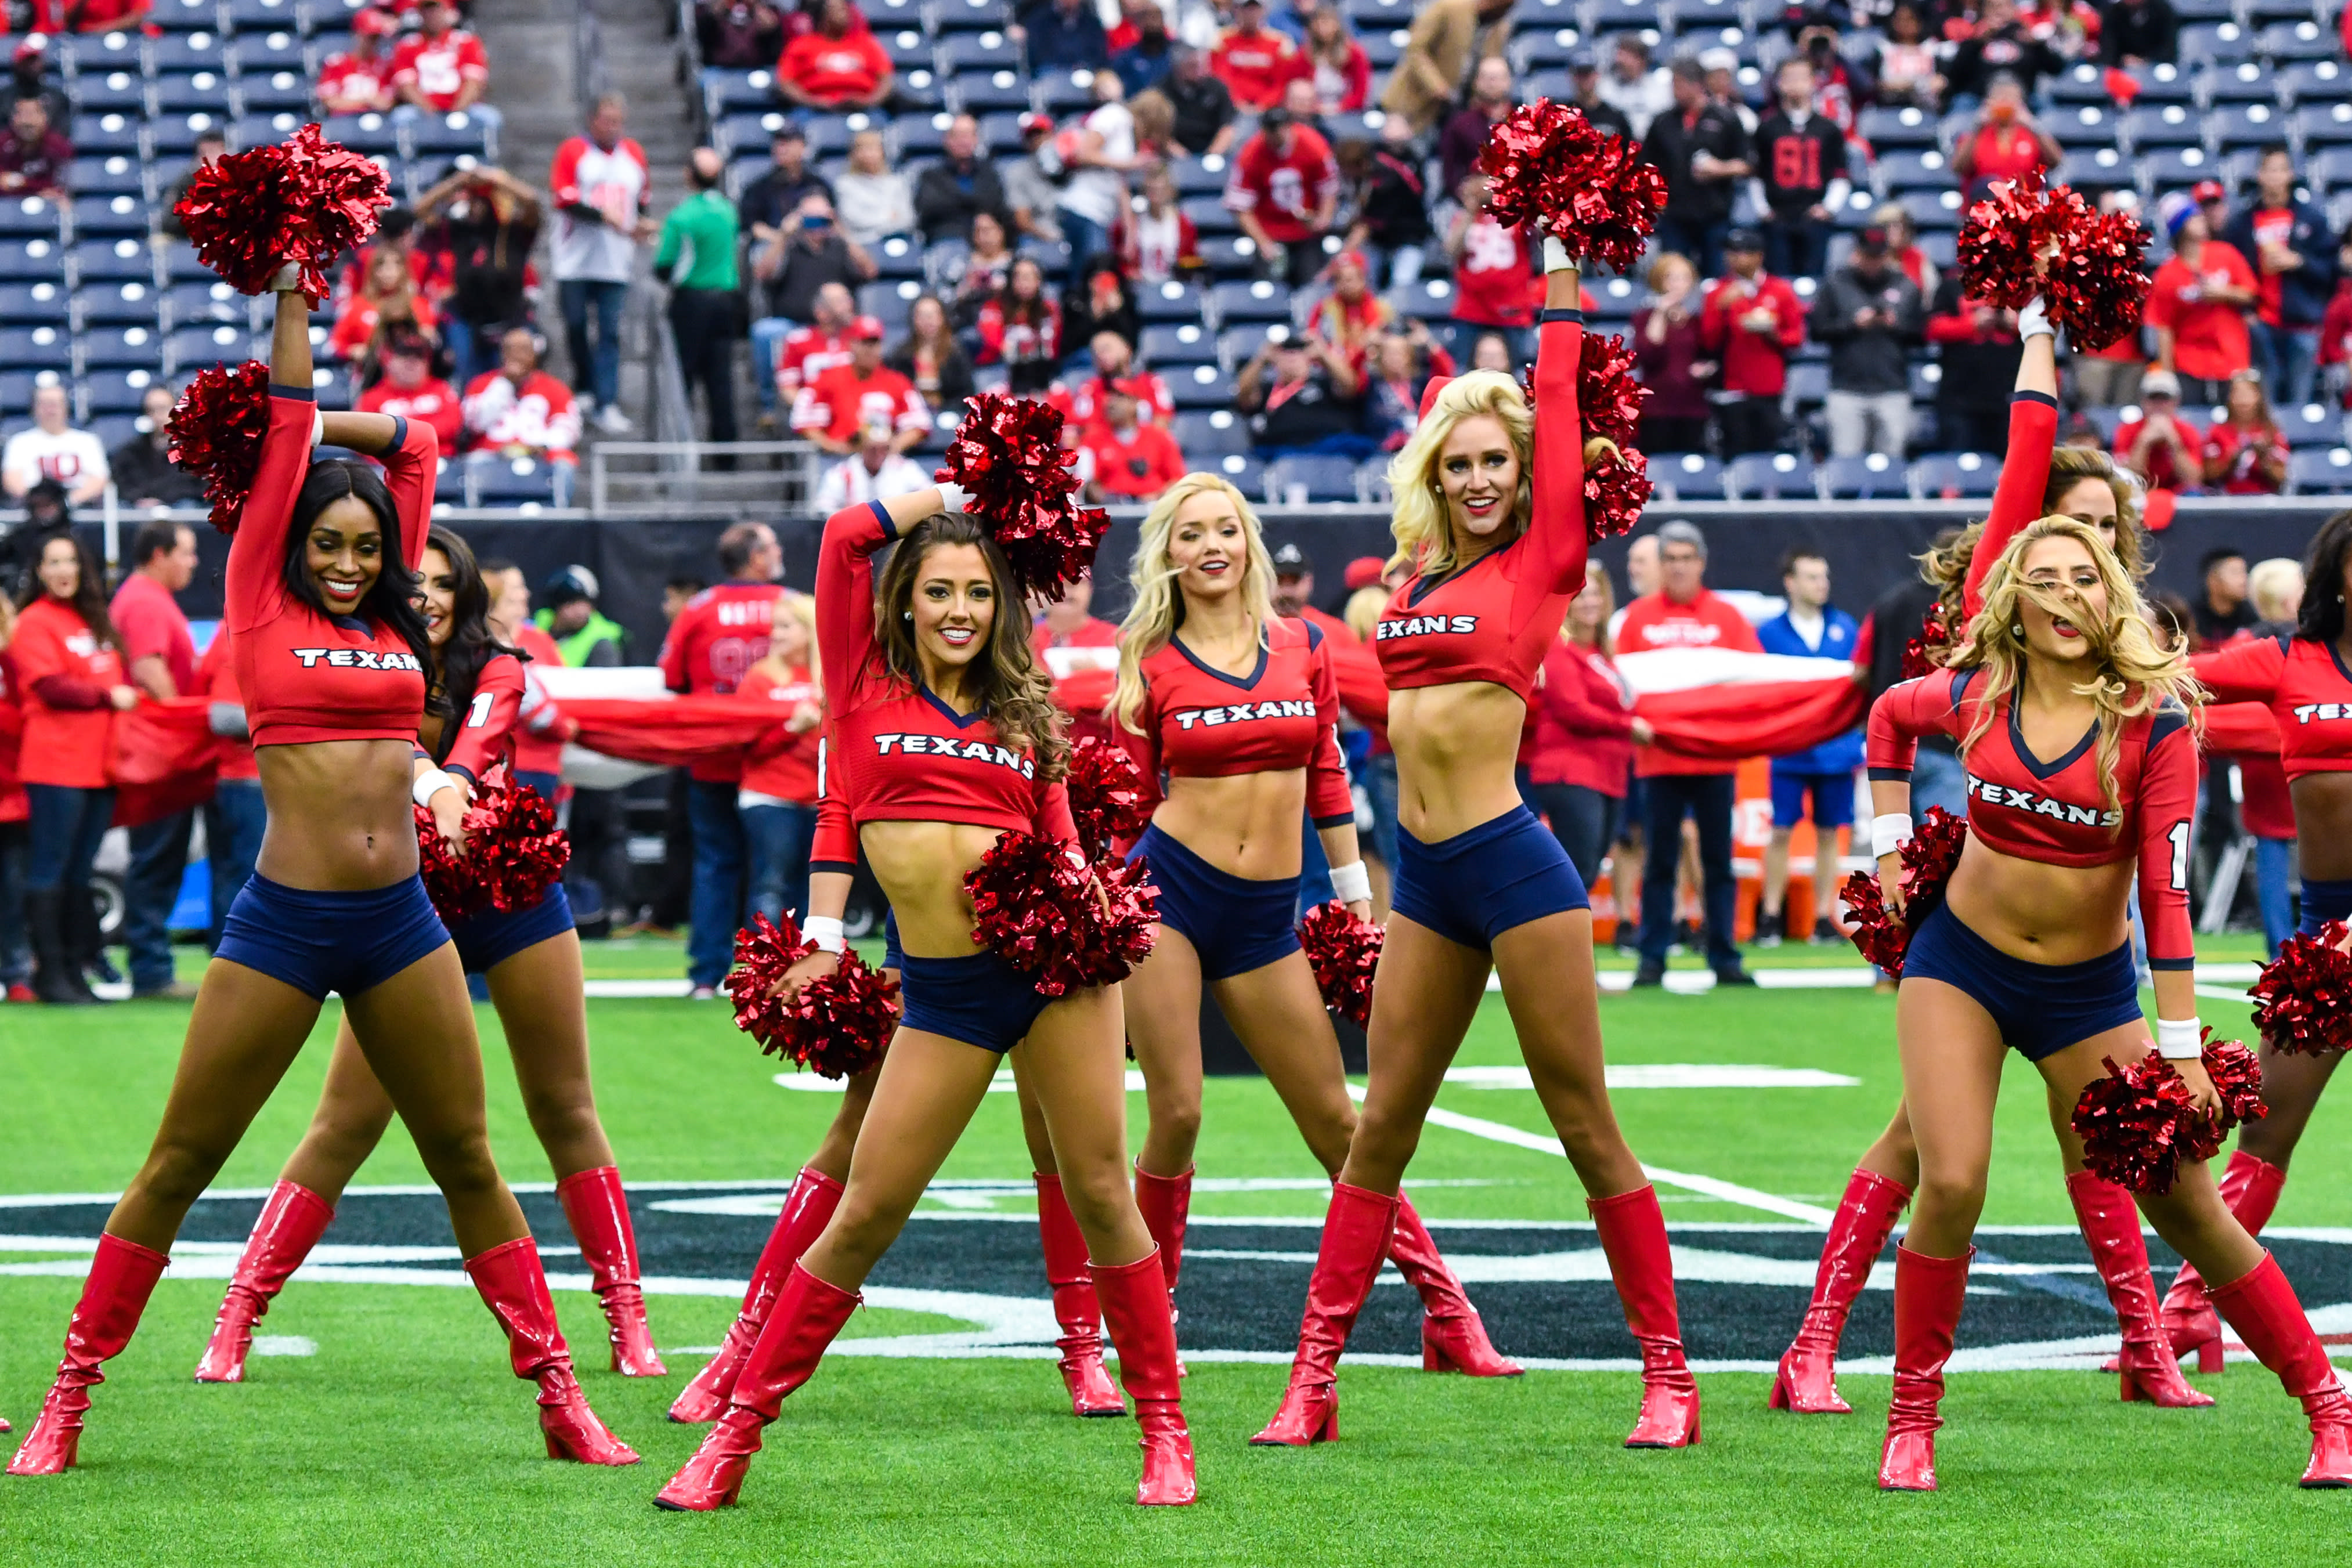 5-former-cheerleaders-are-suing-the-houston-texans-for-alleged